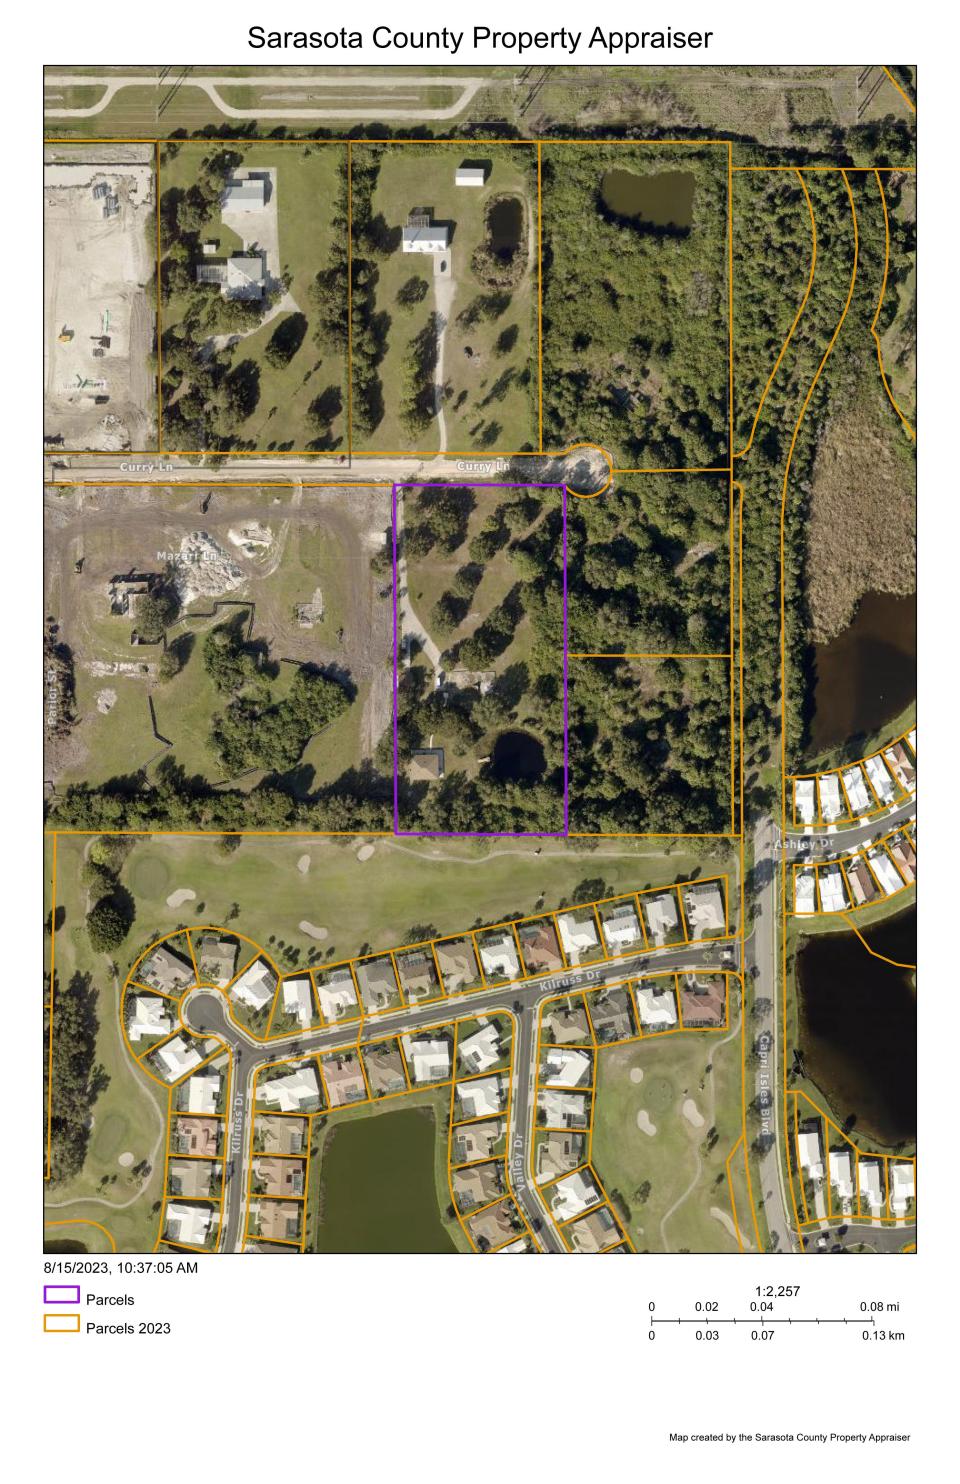 This 5.33-acre parcel on the south side of Curry Lane, outlined in this map from the Sarasota County Property Appraiser’s Office, is being eyed as the site for Curry Lake Apartments, a 65-unit market rate apartment complex. A Zoom Neighborhood Workshop on the proposal is scheduled for 6 p.m., Aug. 23.